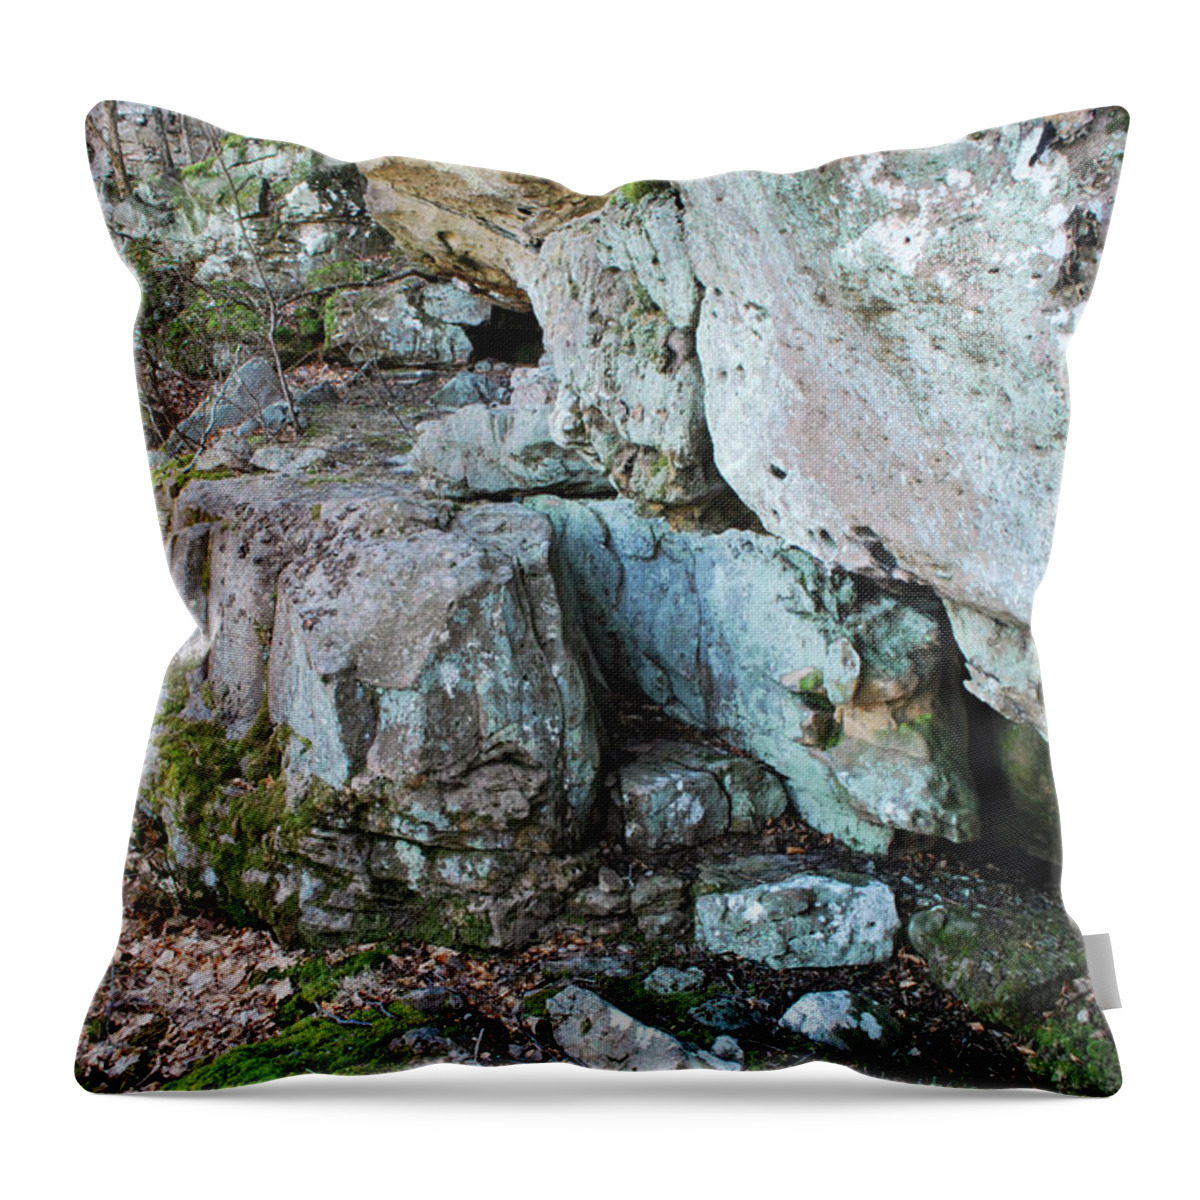 Chimney Top Mountain Throw Pillow featuring the photograph Sandstone Rock Formation by Phil Perkins